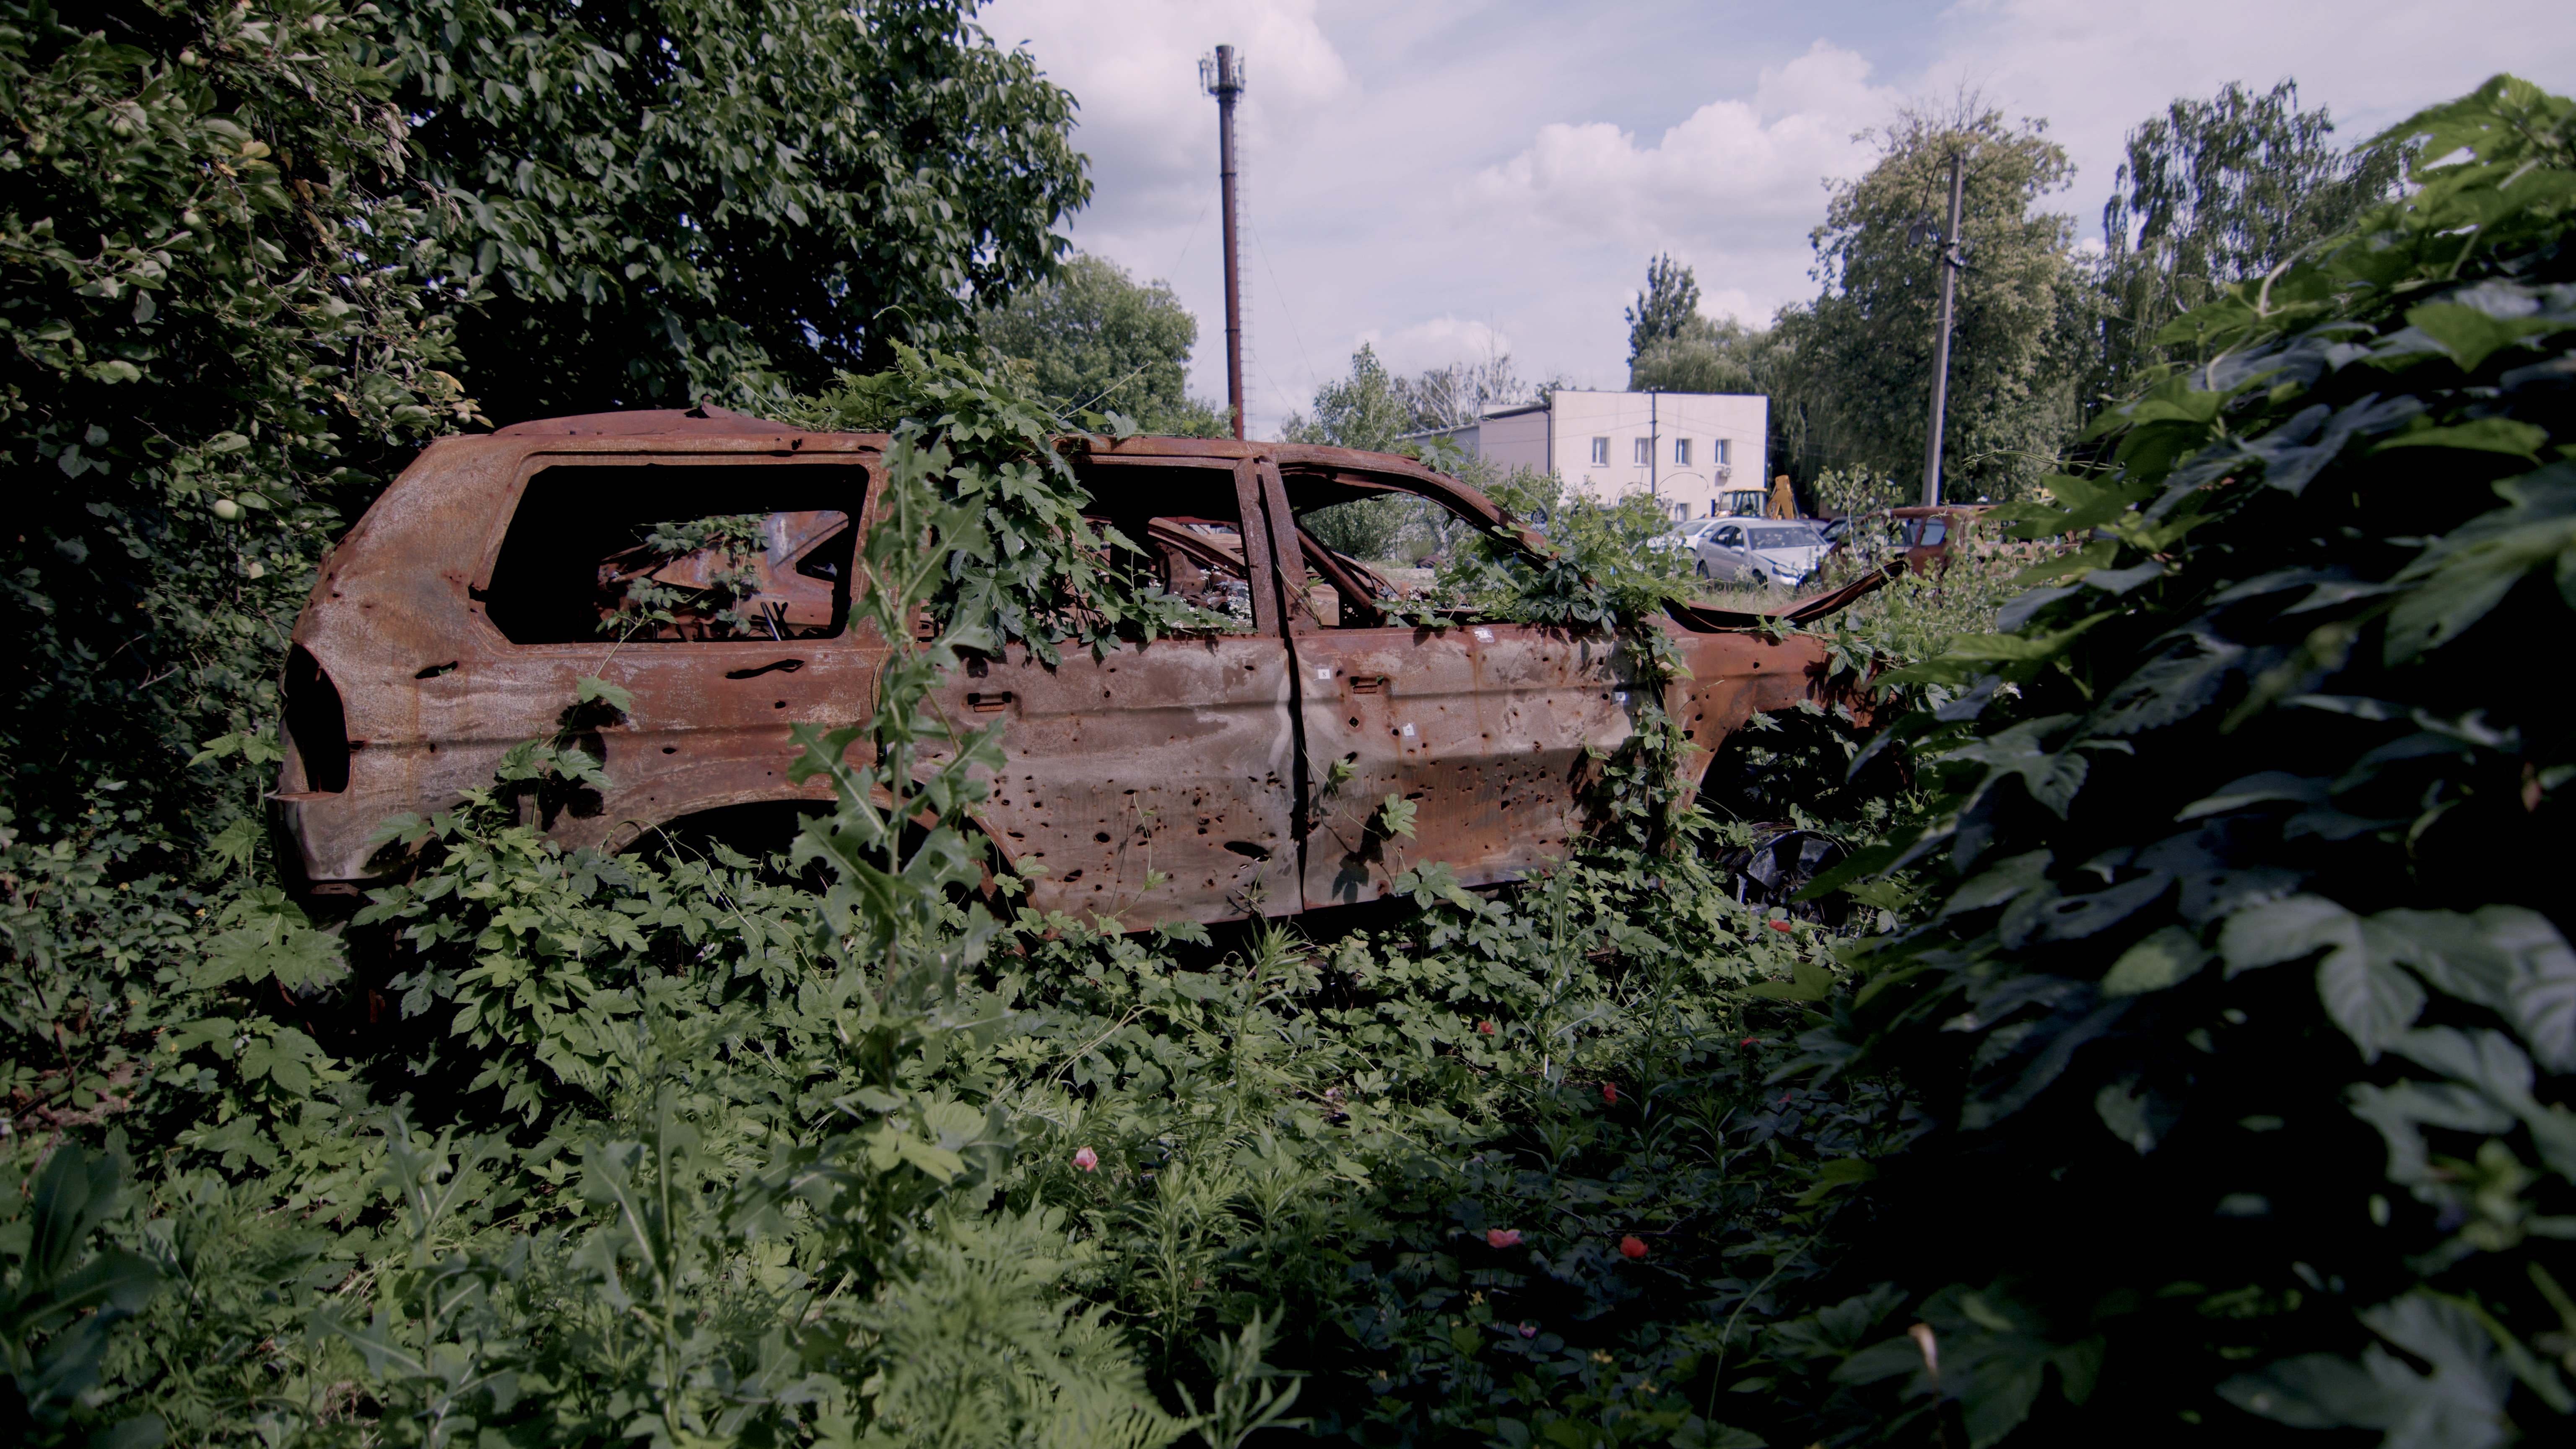 The village of Dmytrivka, a car dump. The remains of a Mitsubishi Pajero Sport that was shot up on the Zhytomyr highway. Photo: DENOTAT documentary group, Roman Synchuk